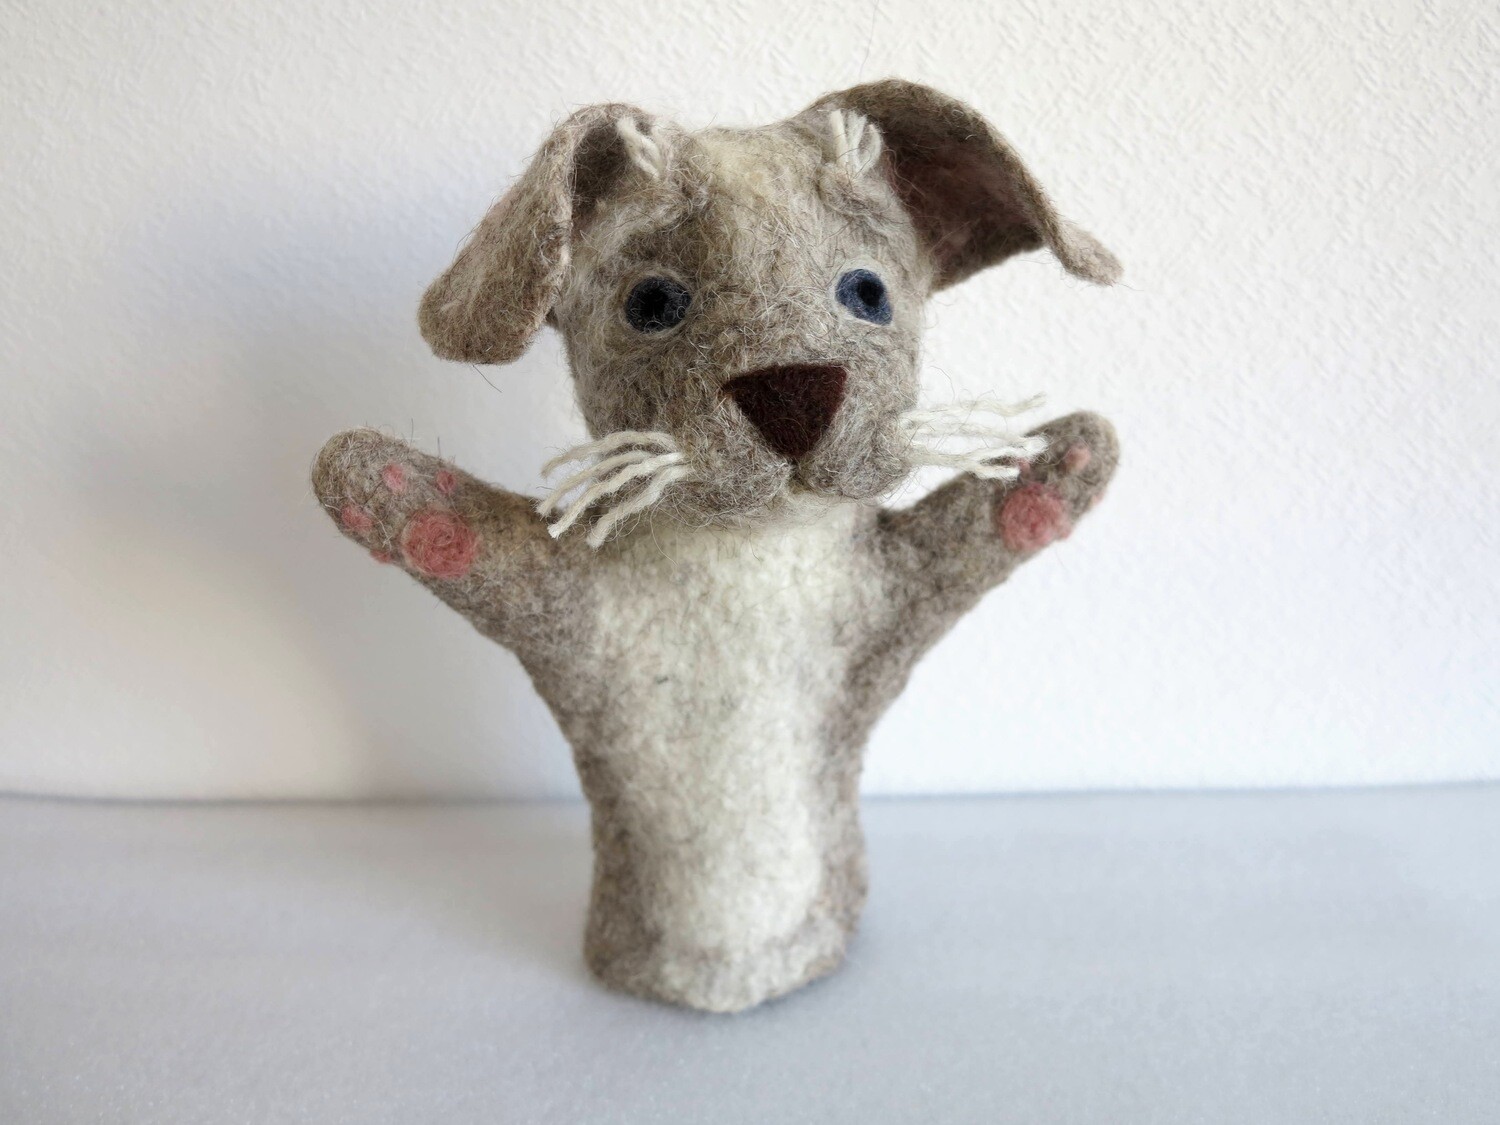 More hand puppets - handmade from wool